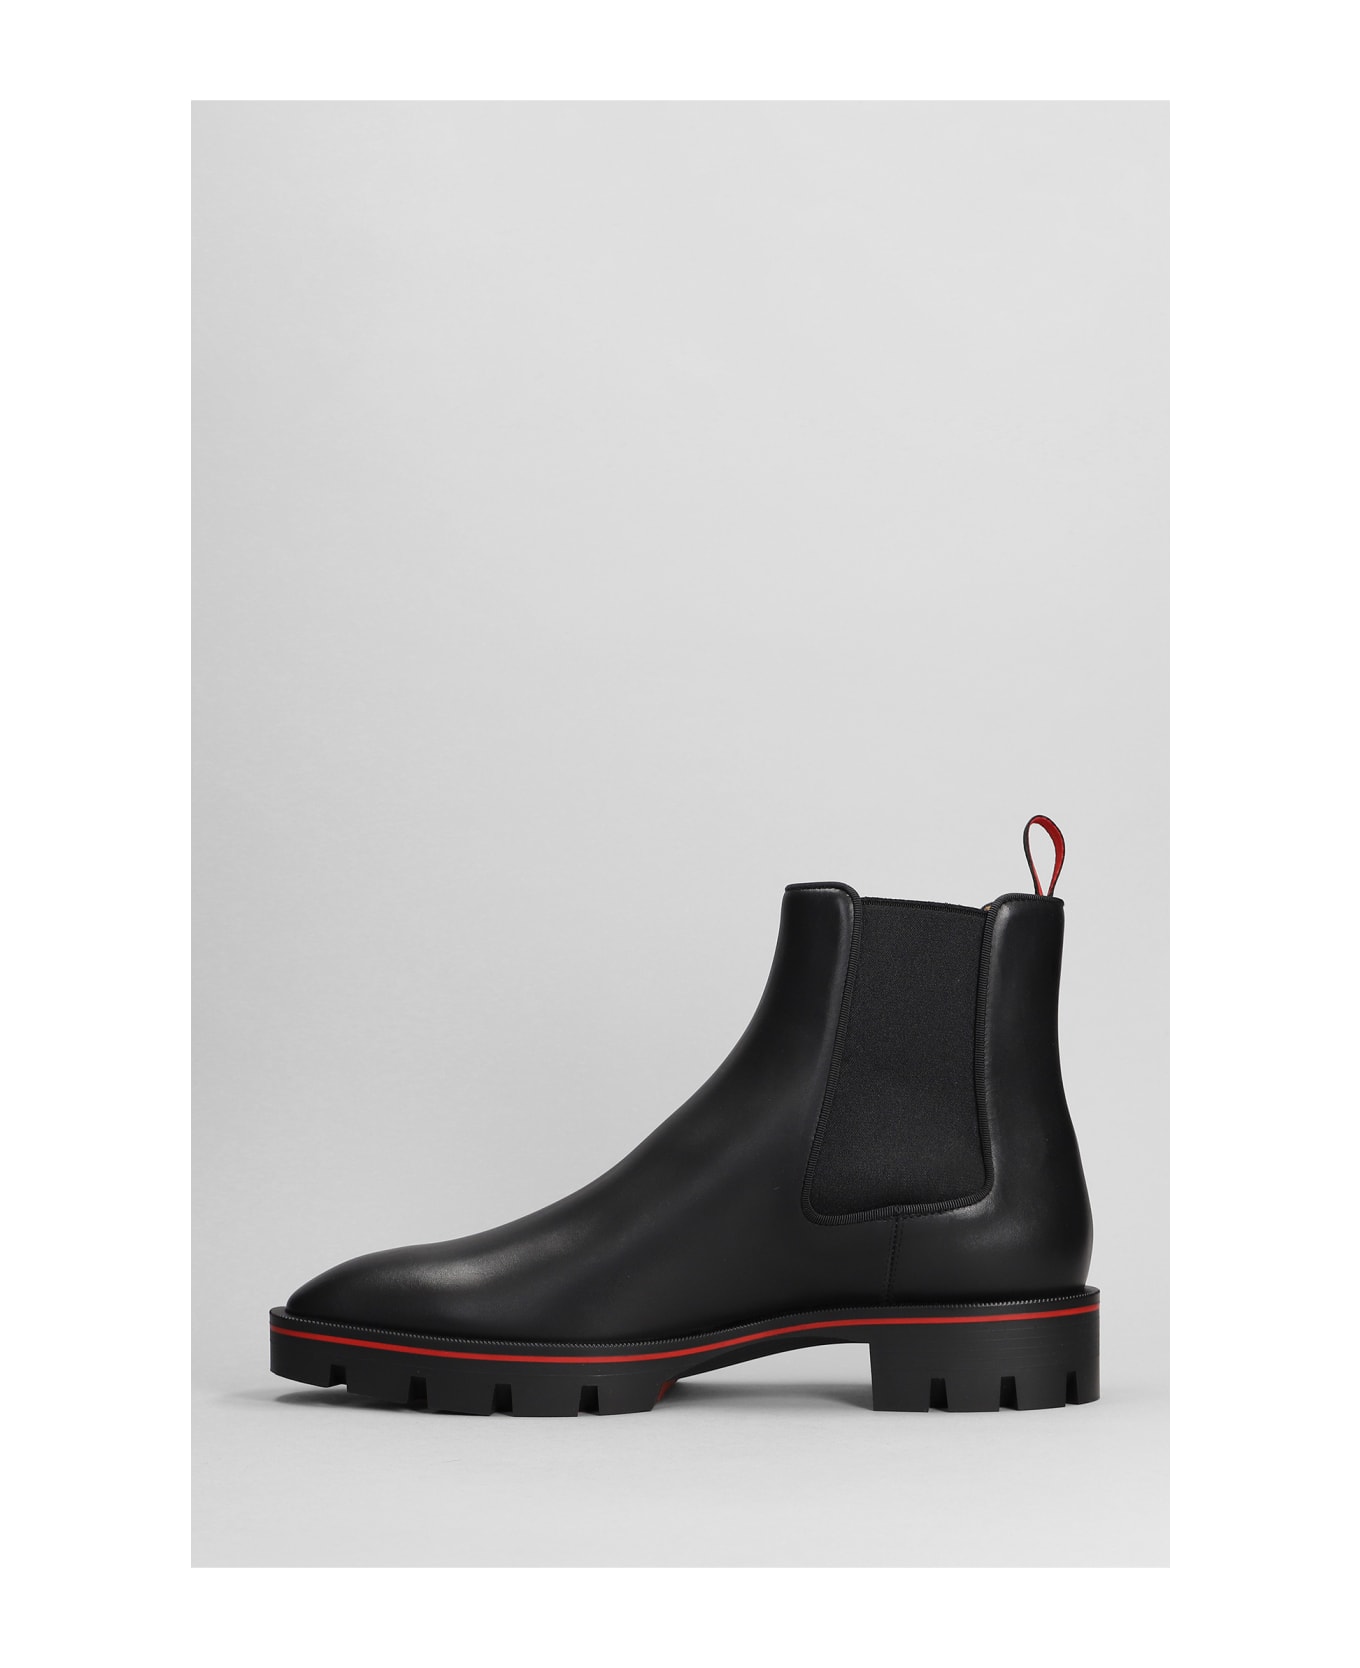 Christian Louboutin Alpinosol Ankle Boot In Calf Leather - BLACK ブーツ